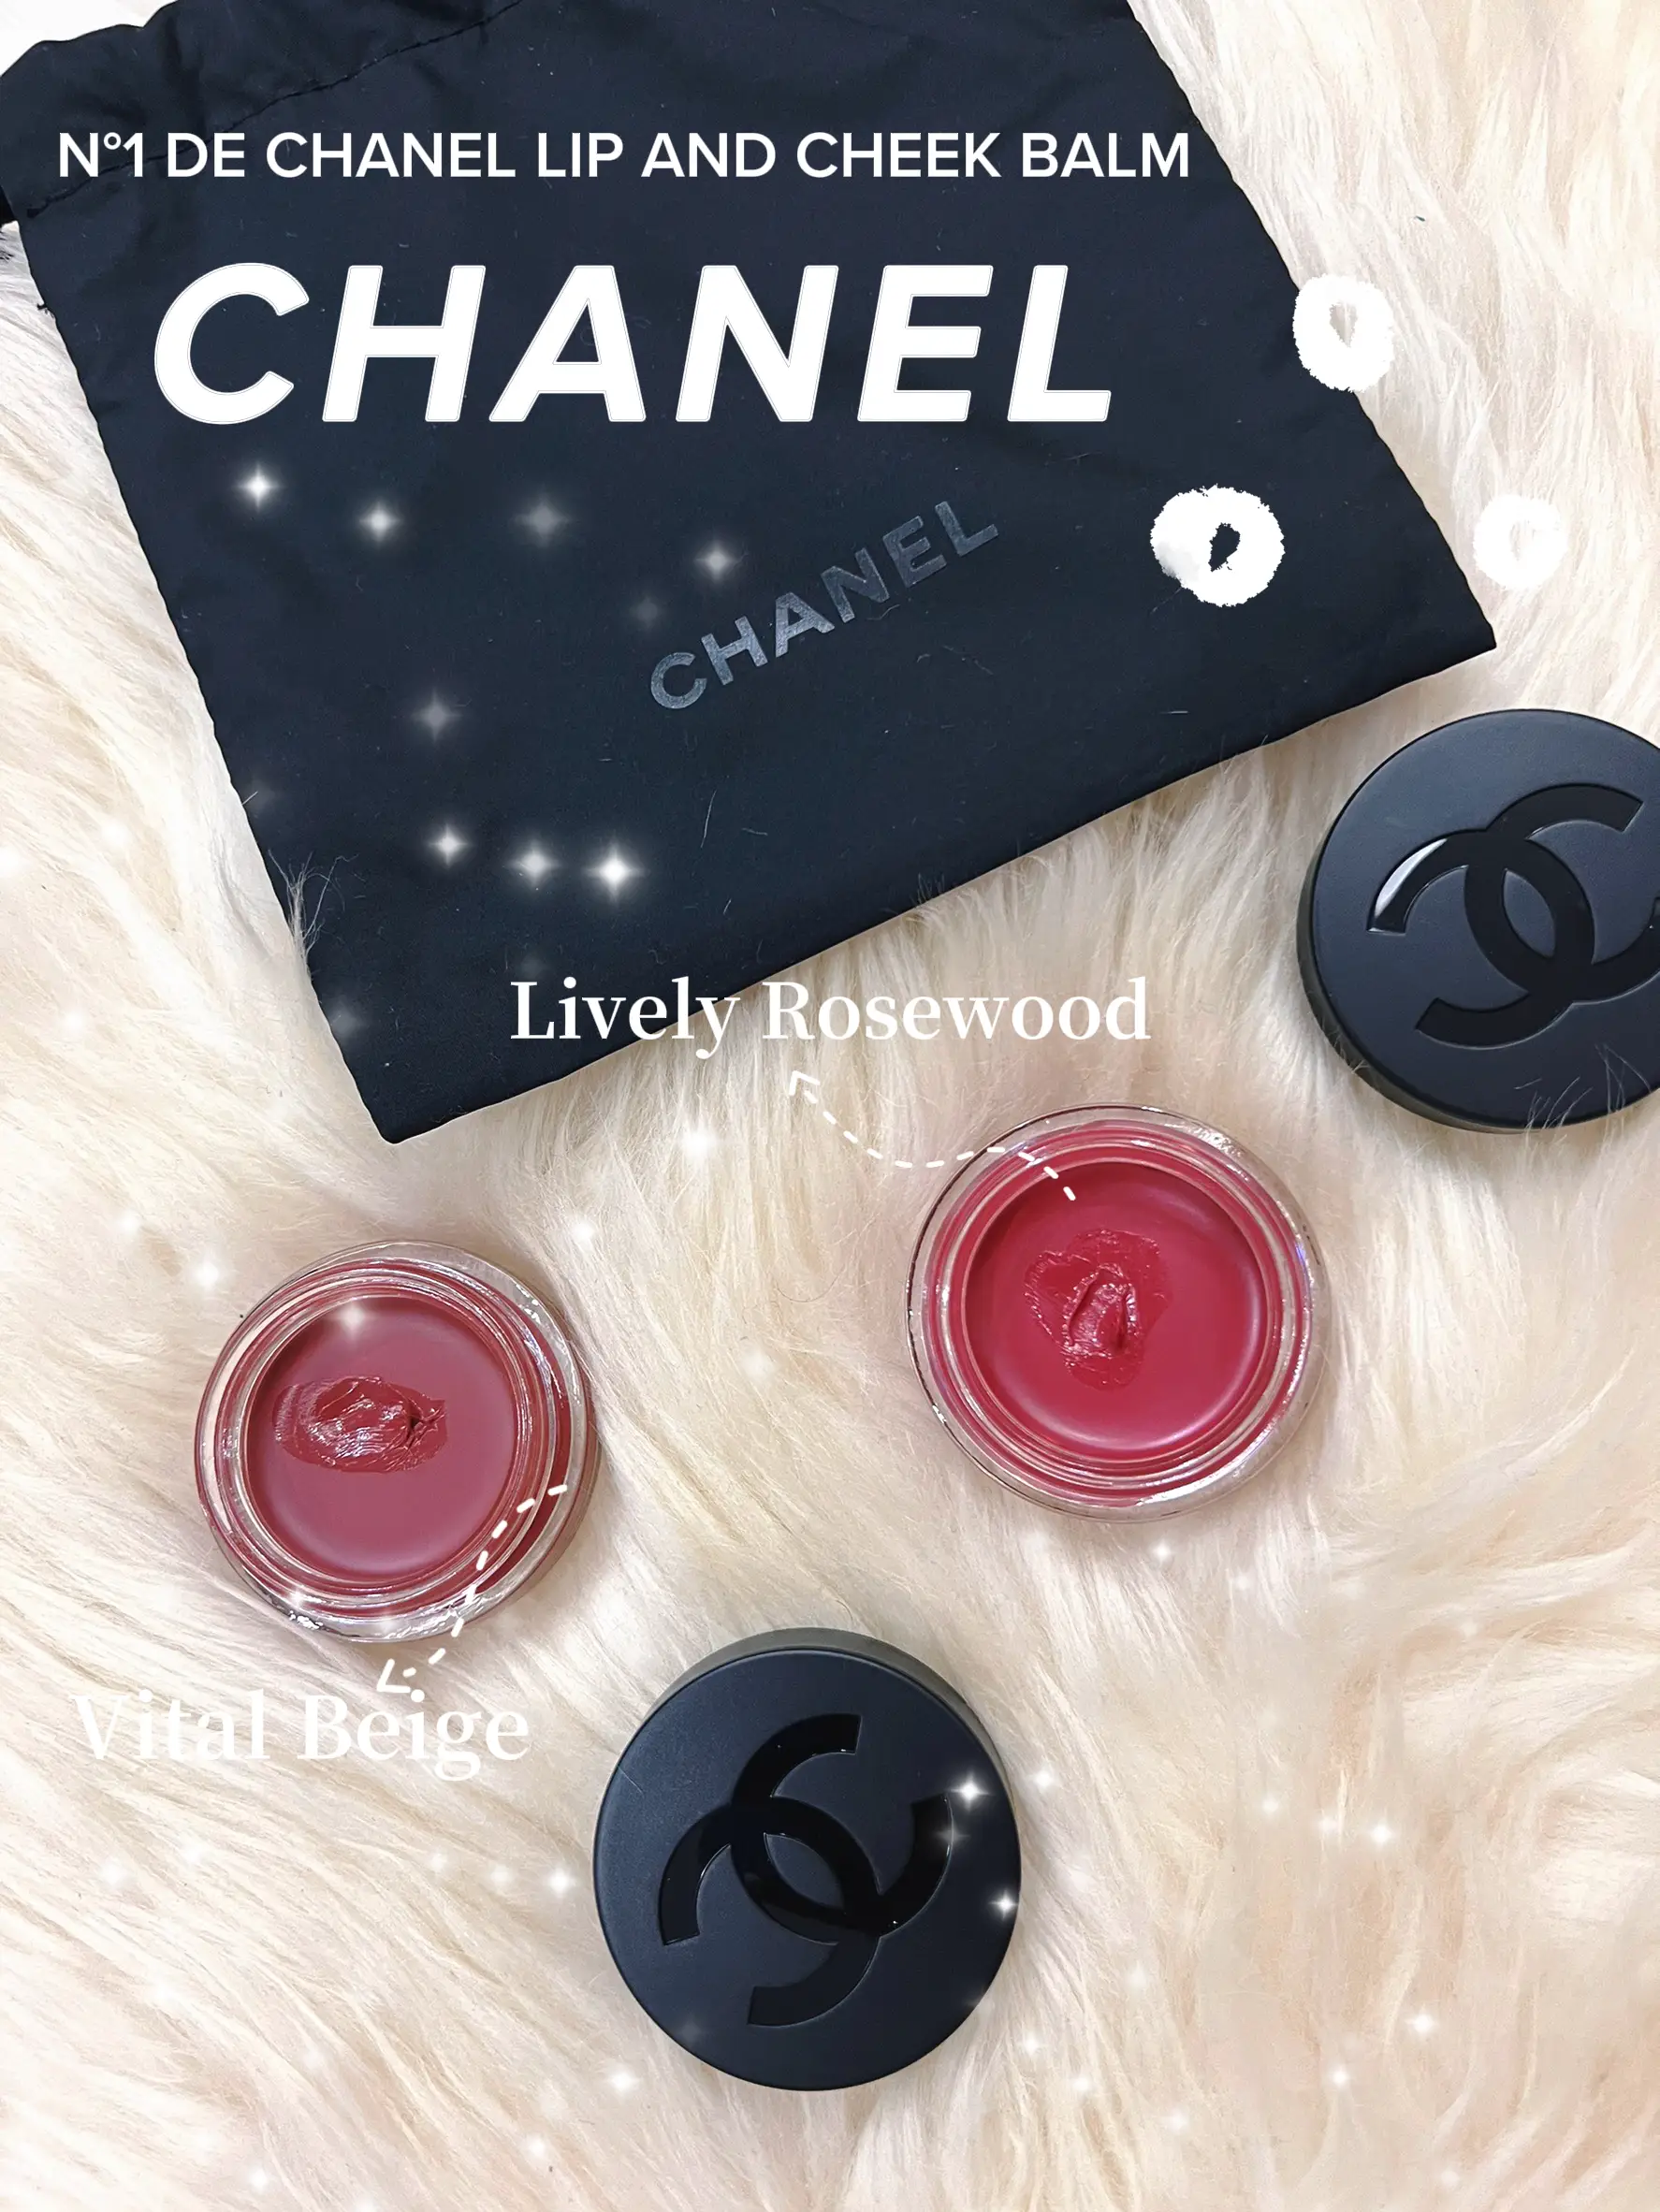 New!! Chanel Lip & Cheek balms 💄💋, Gallery posted by Chalomchompoo